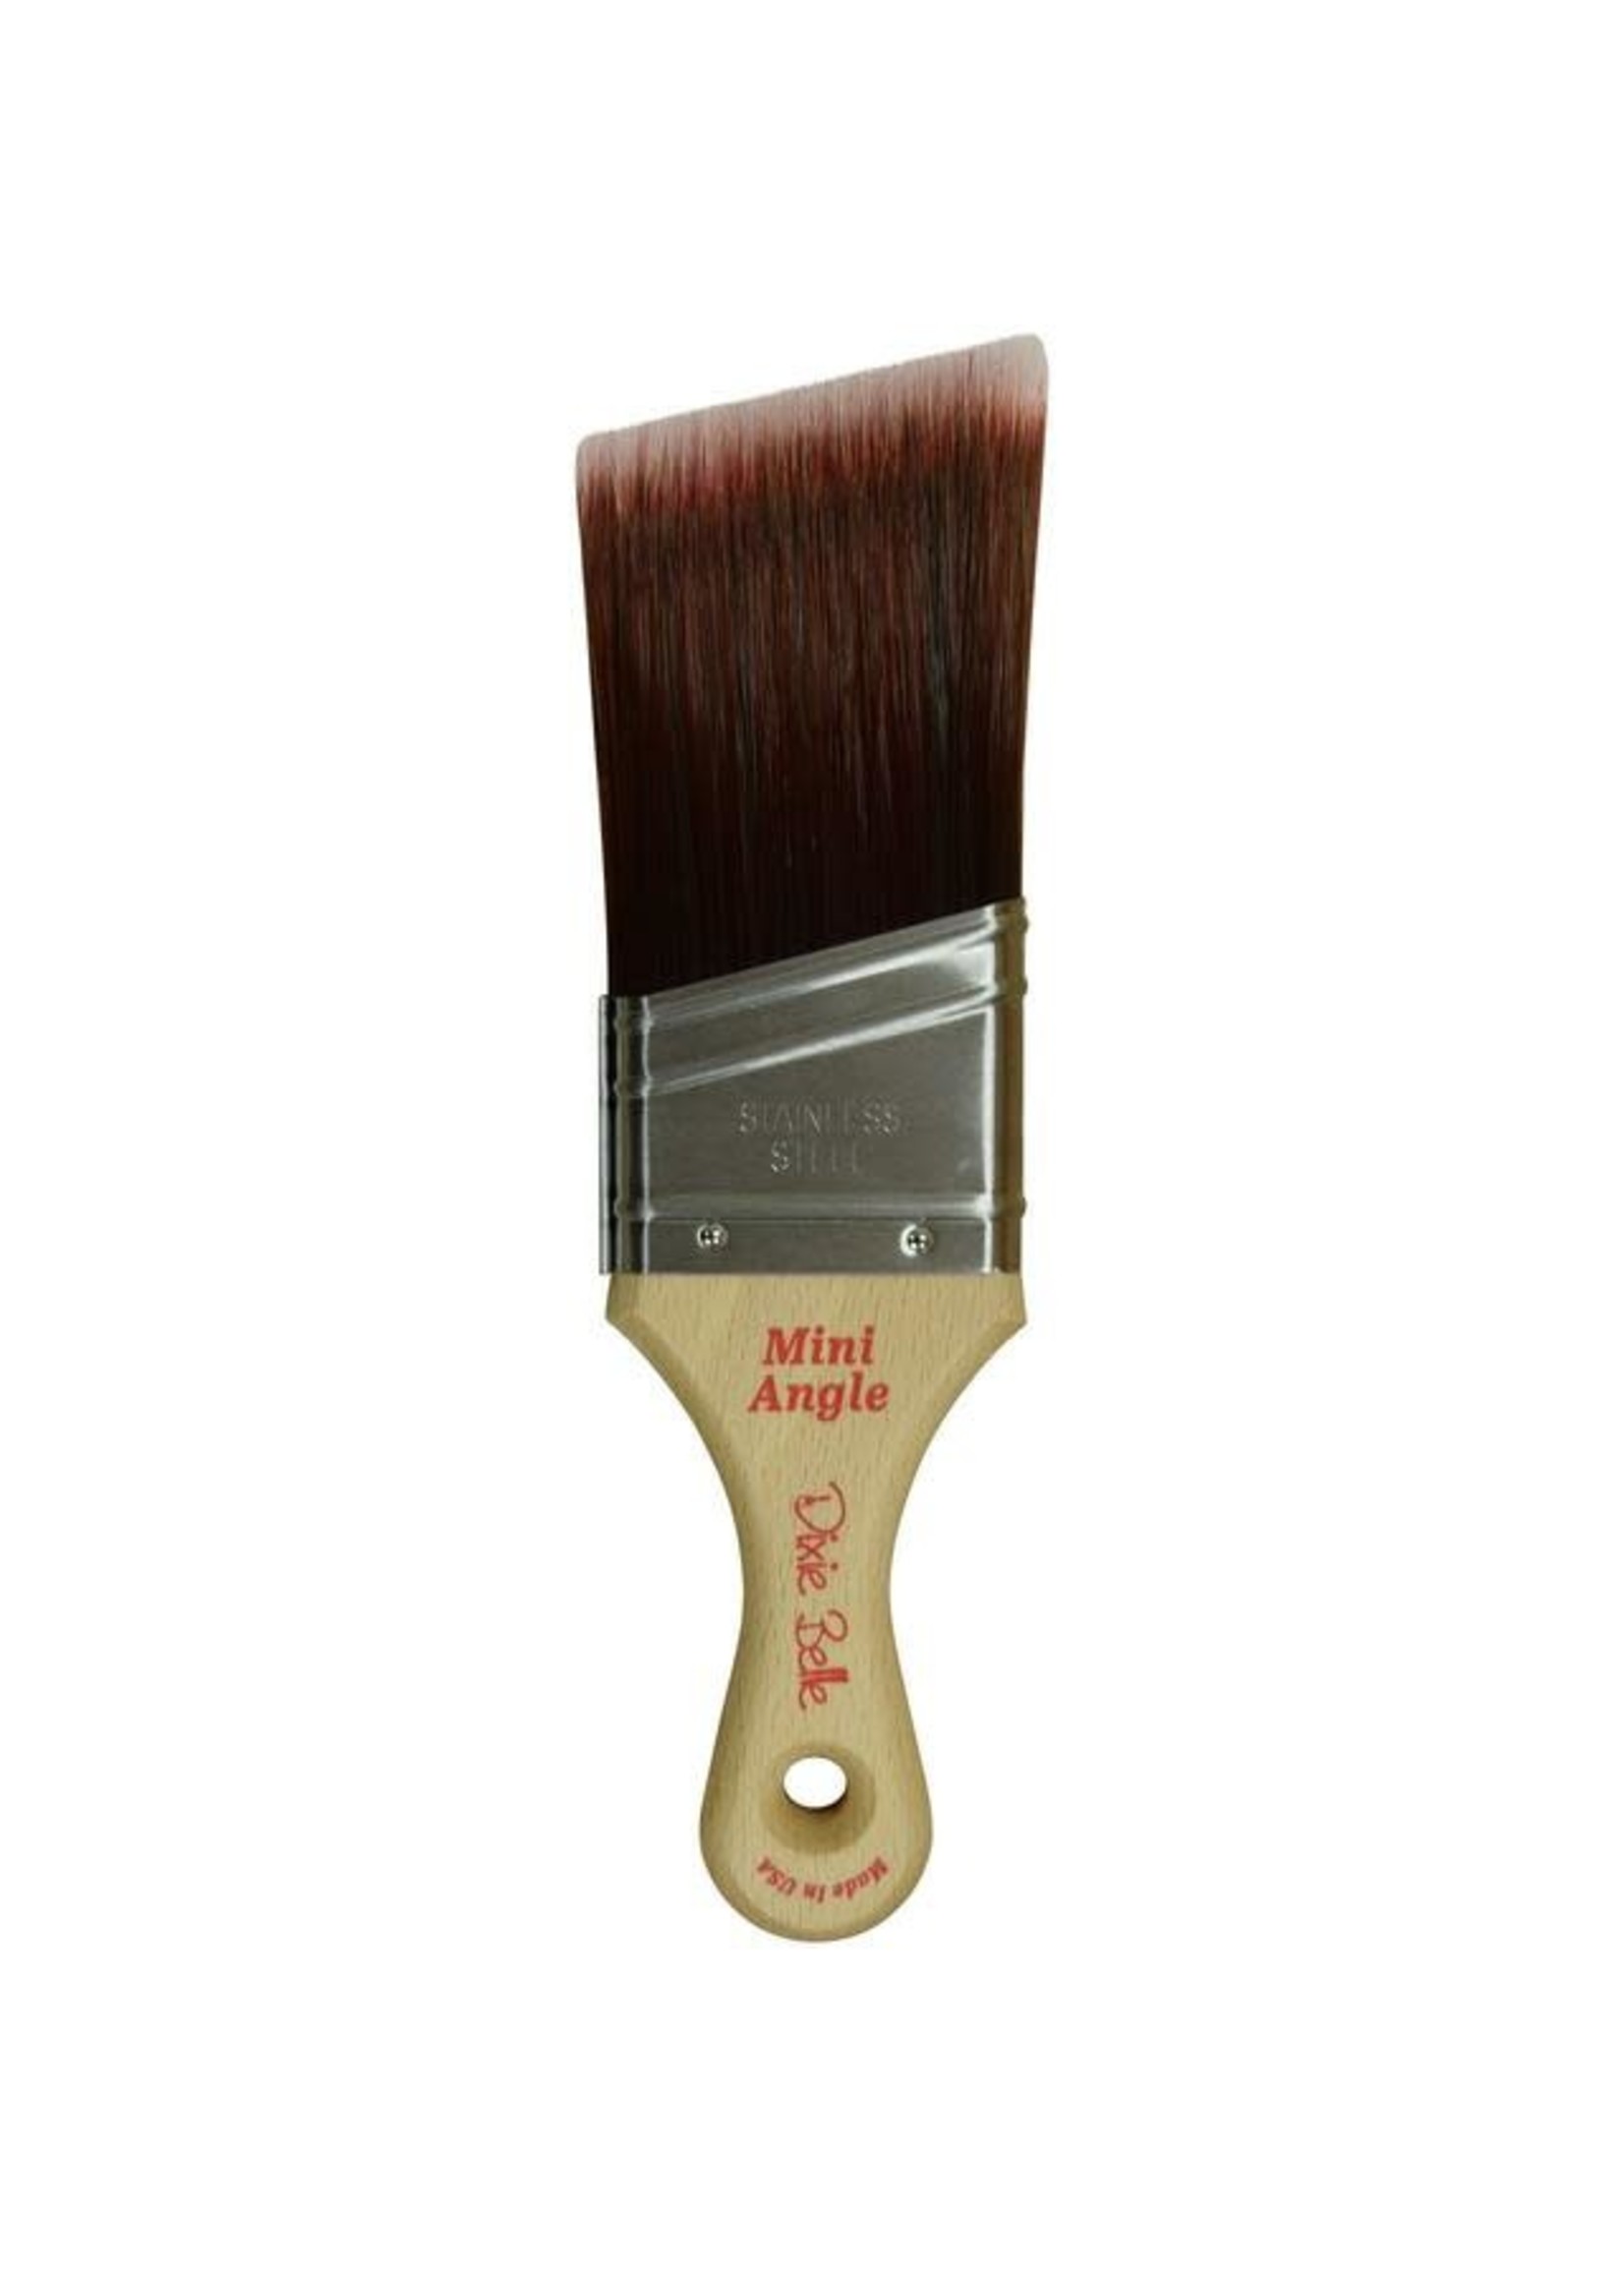 Dixie Belle Brushes & More DBP Mini Angle Synthetic Brush